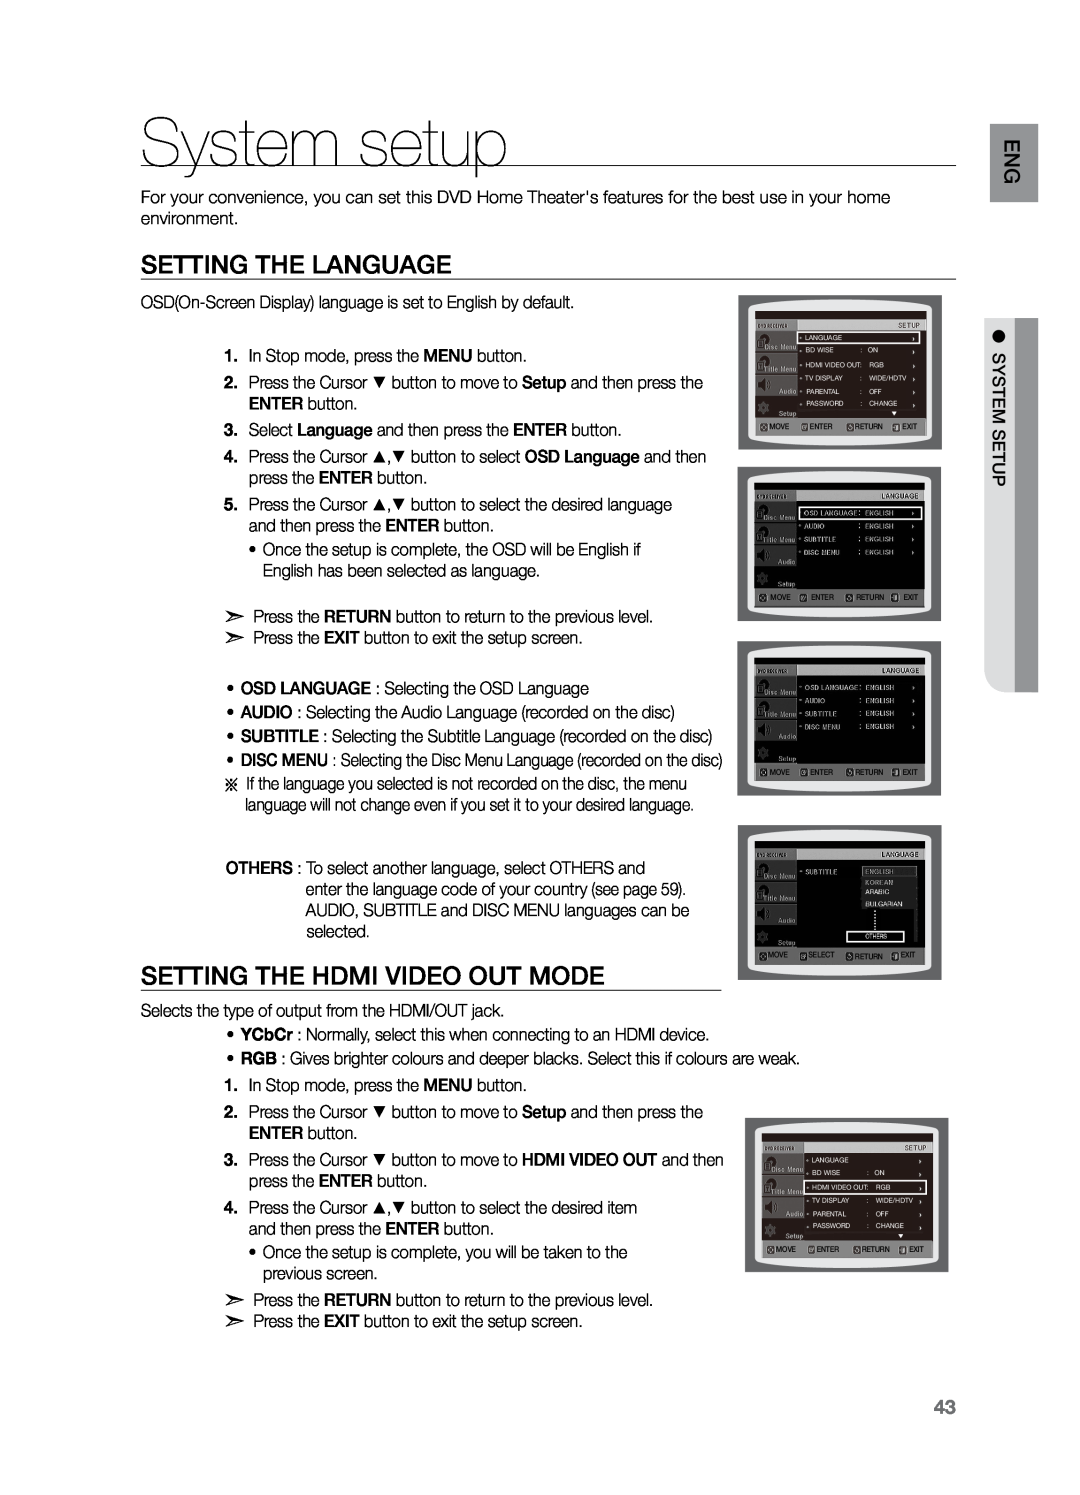 Samsung HT-Z221 user manual System setup, Setting the Language, Setting the HDMI VIDEO OUT MODE 